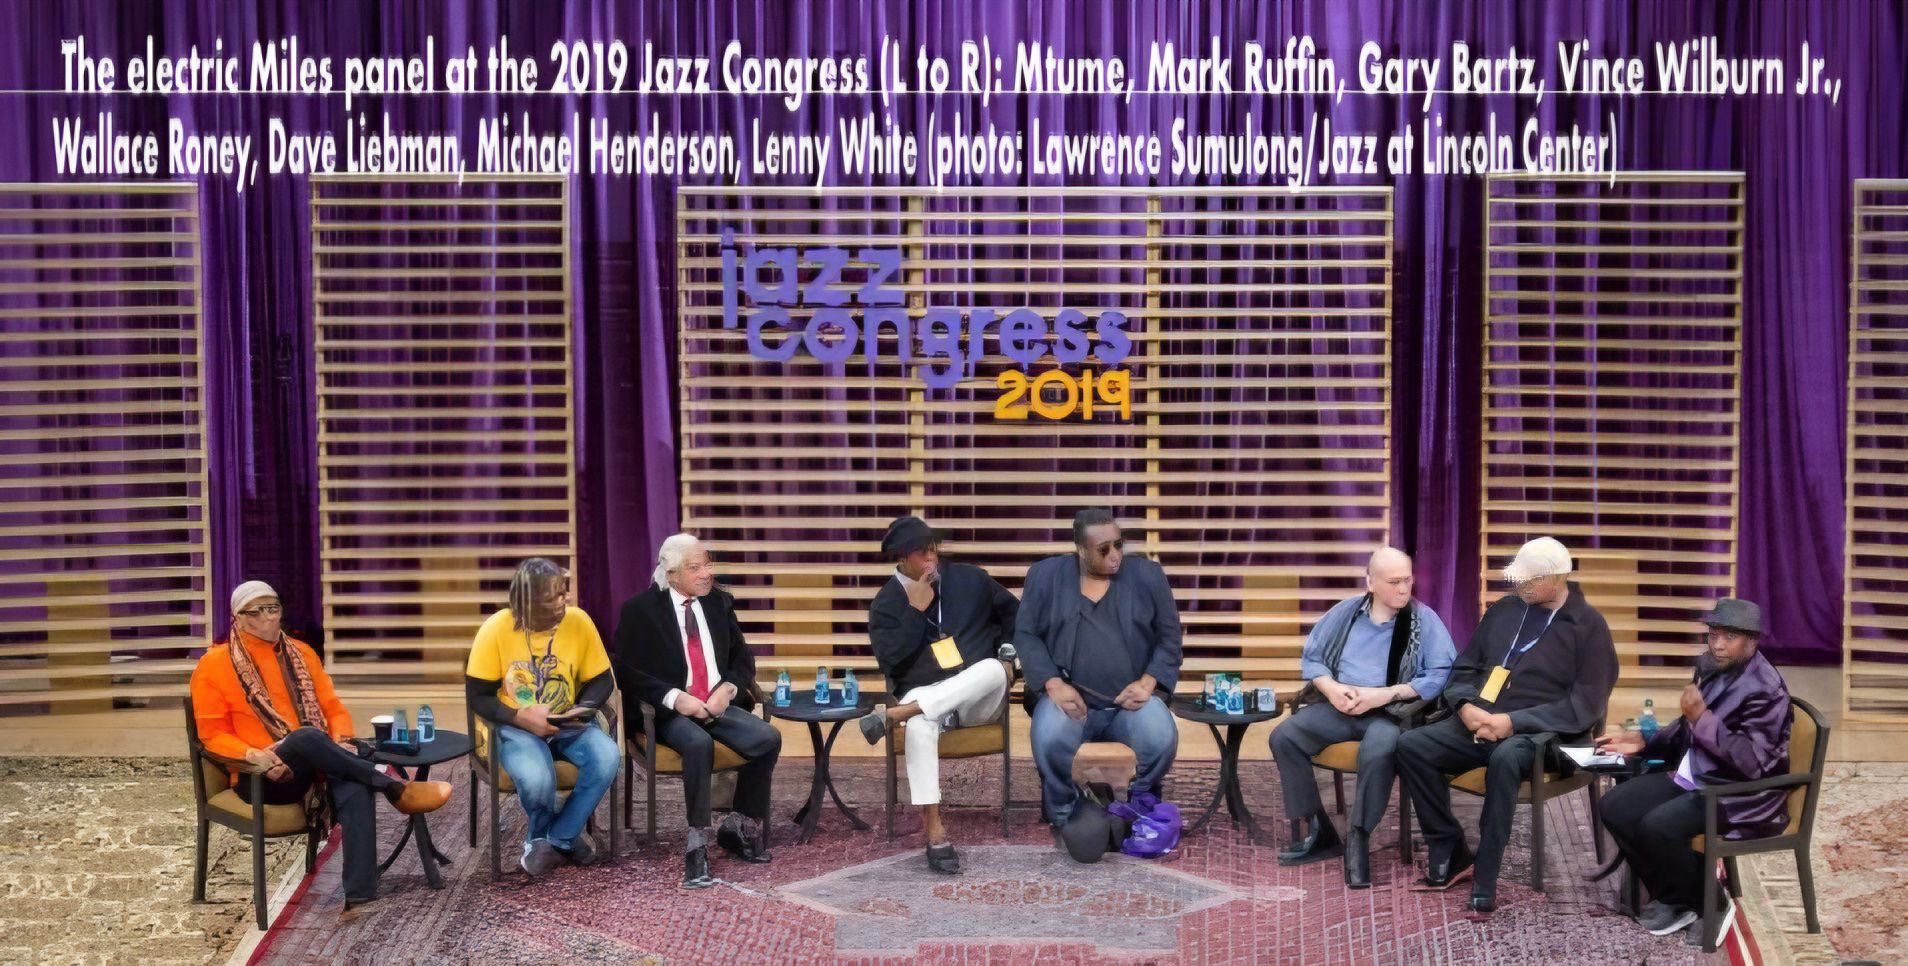 A slightly enhanced color photograph of the Electric Miles panel at the Jazz Congress in 2019.